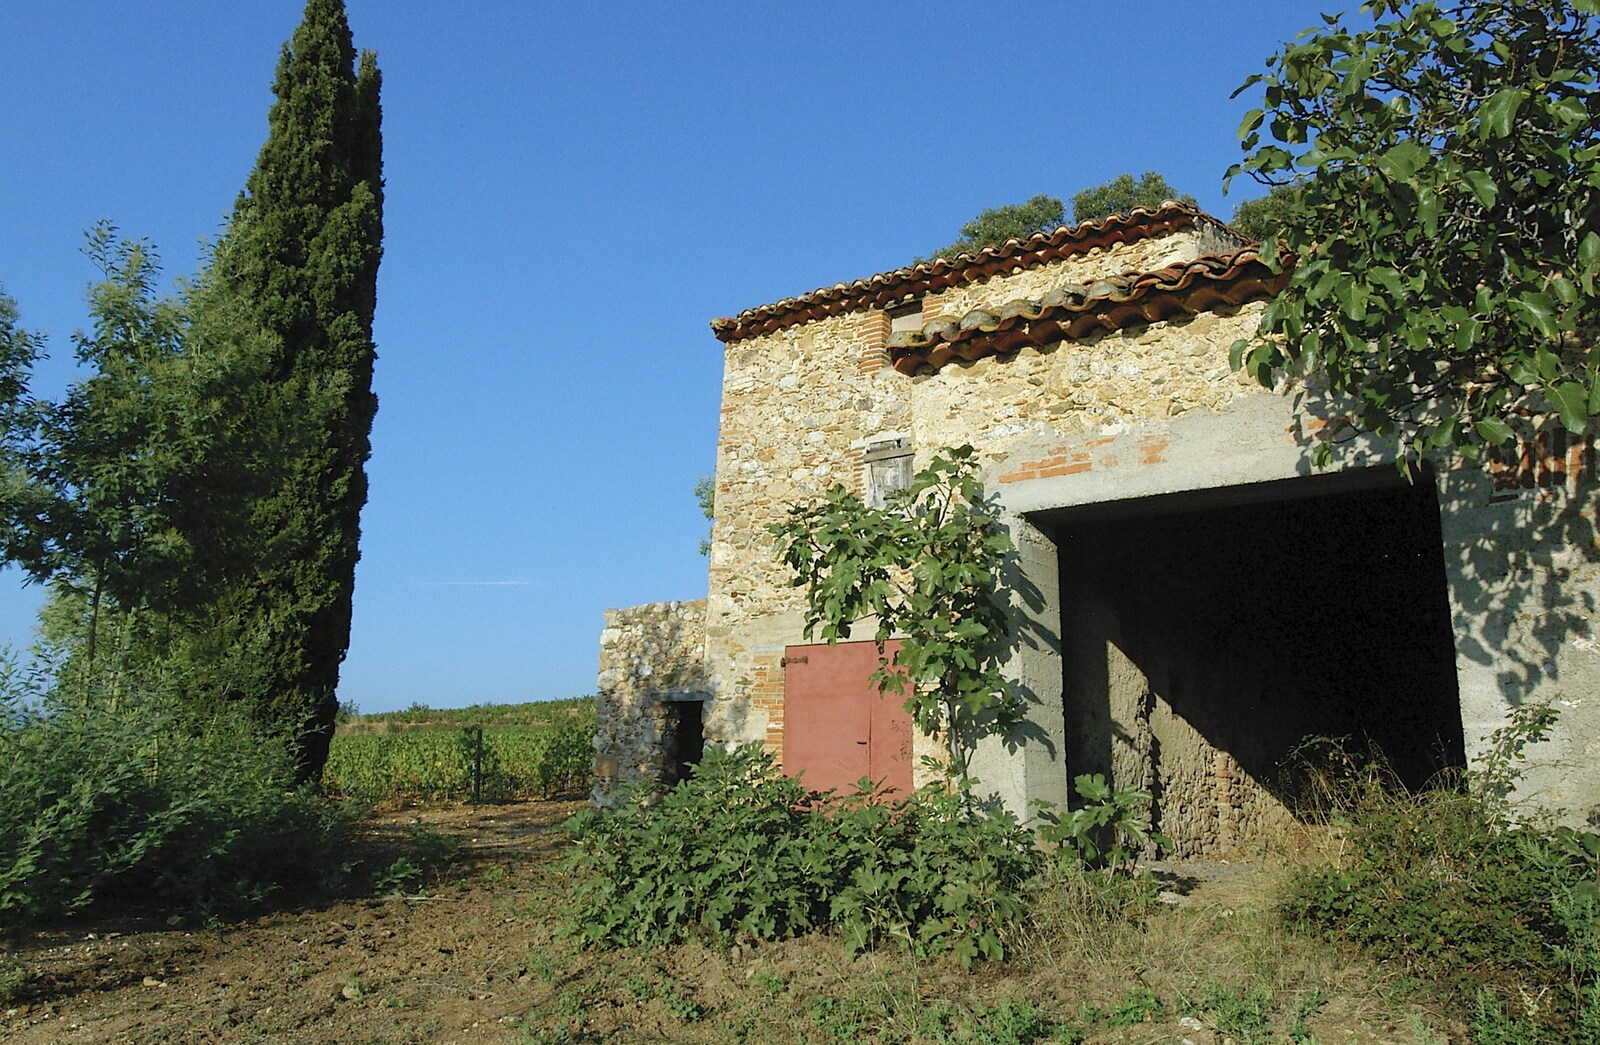 The derelict farm building from Grape Picking and Pressing, Roussillon, France - 19th September 2006